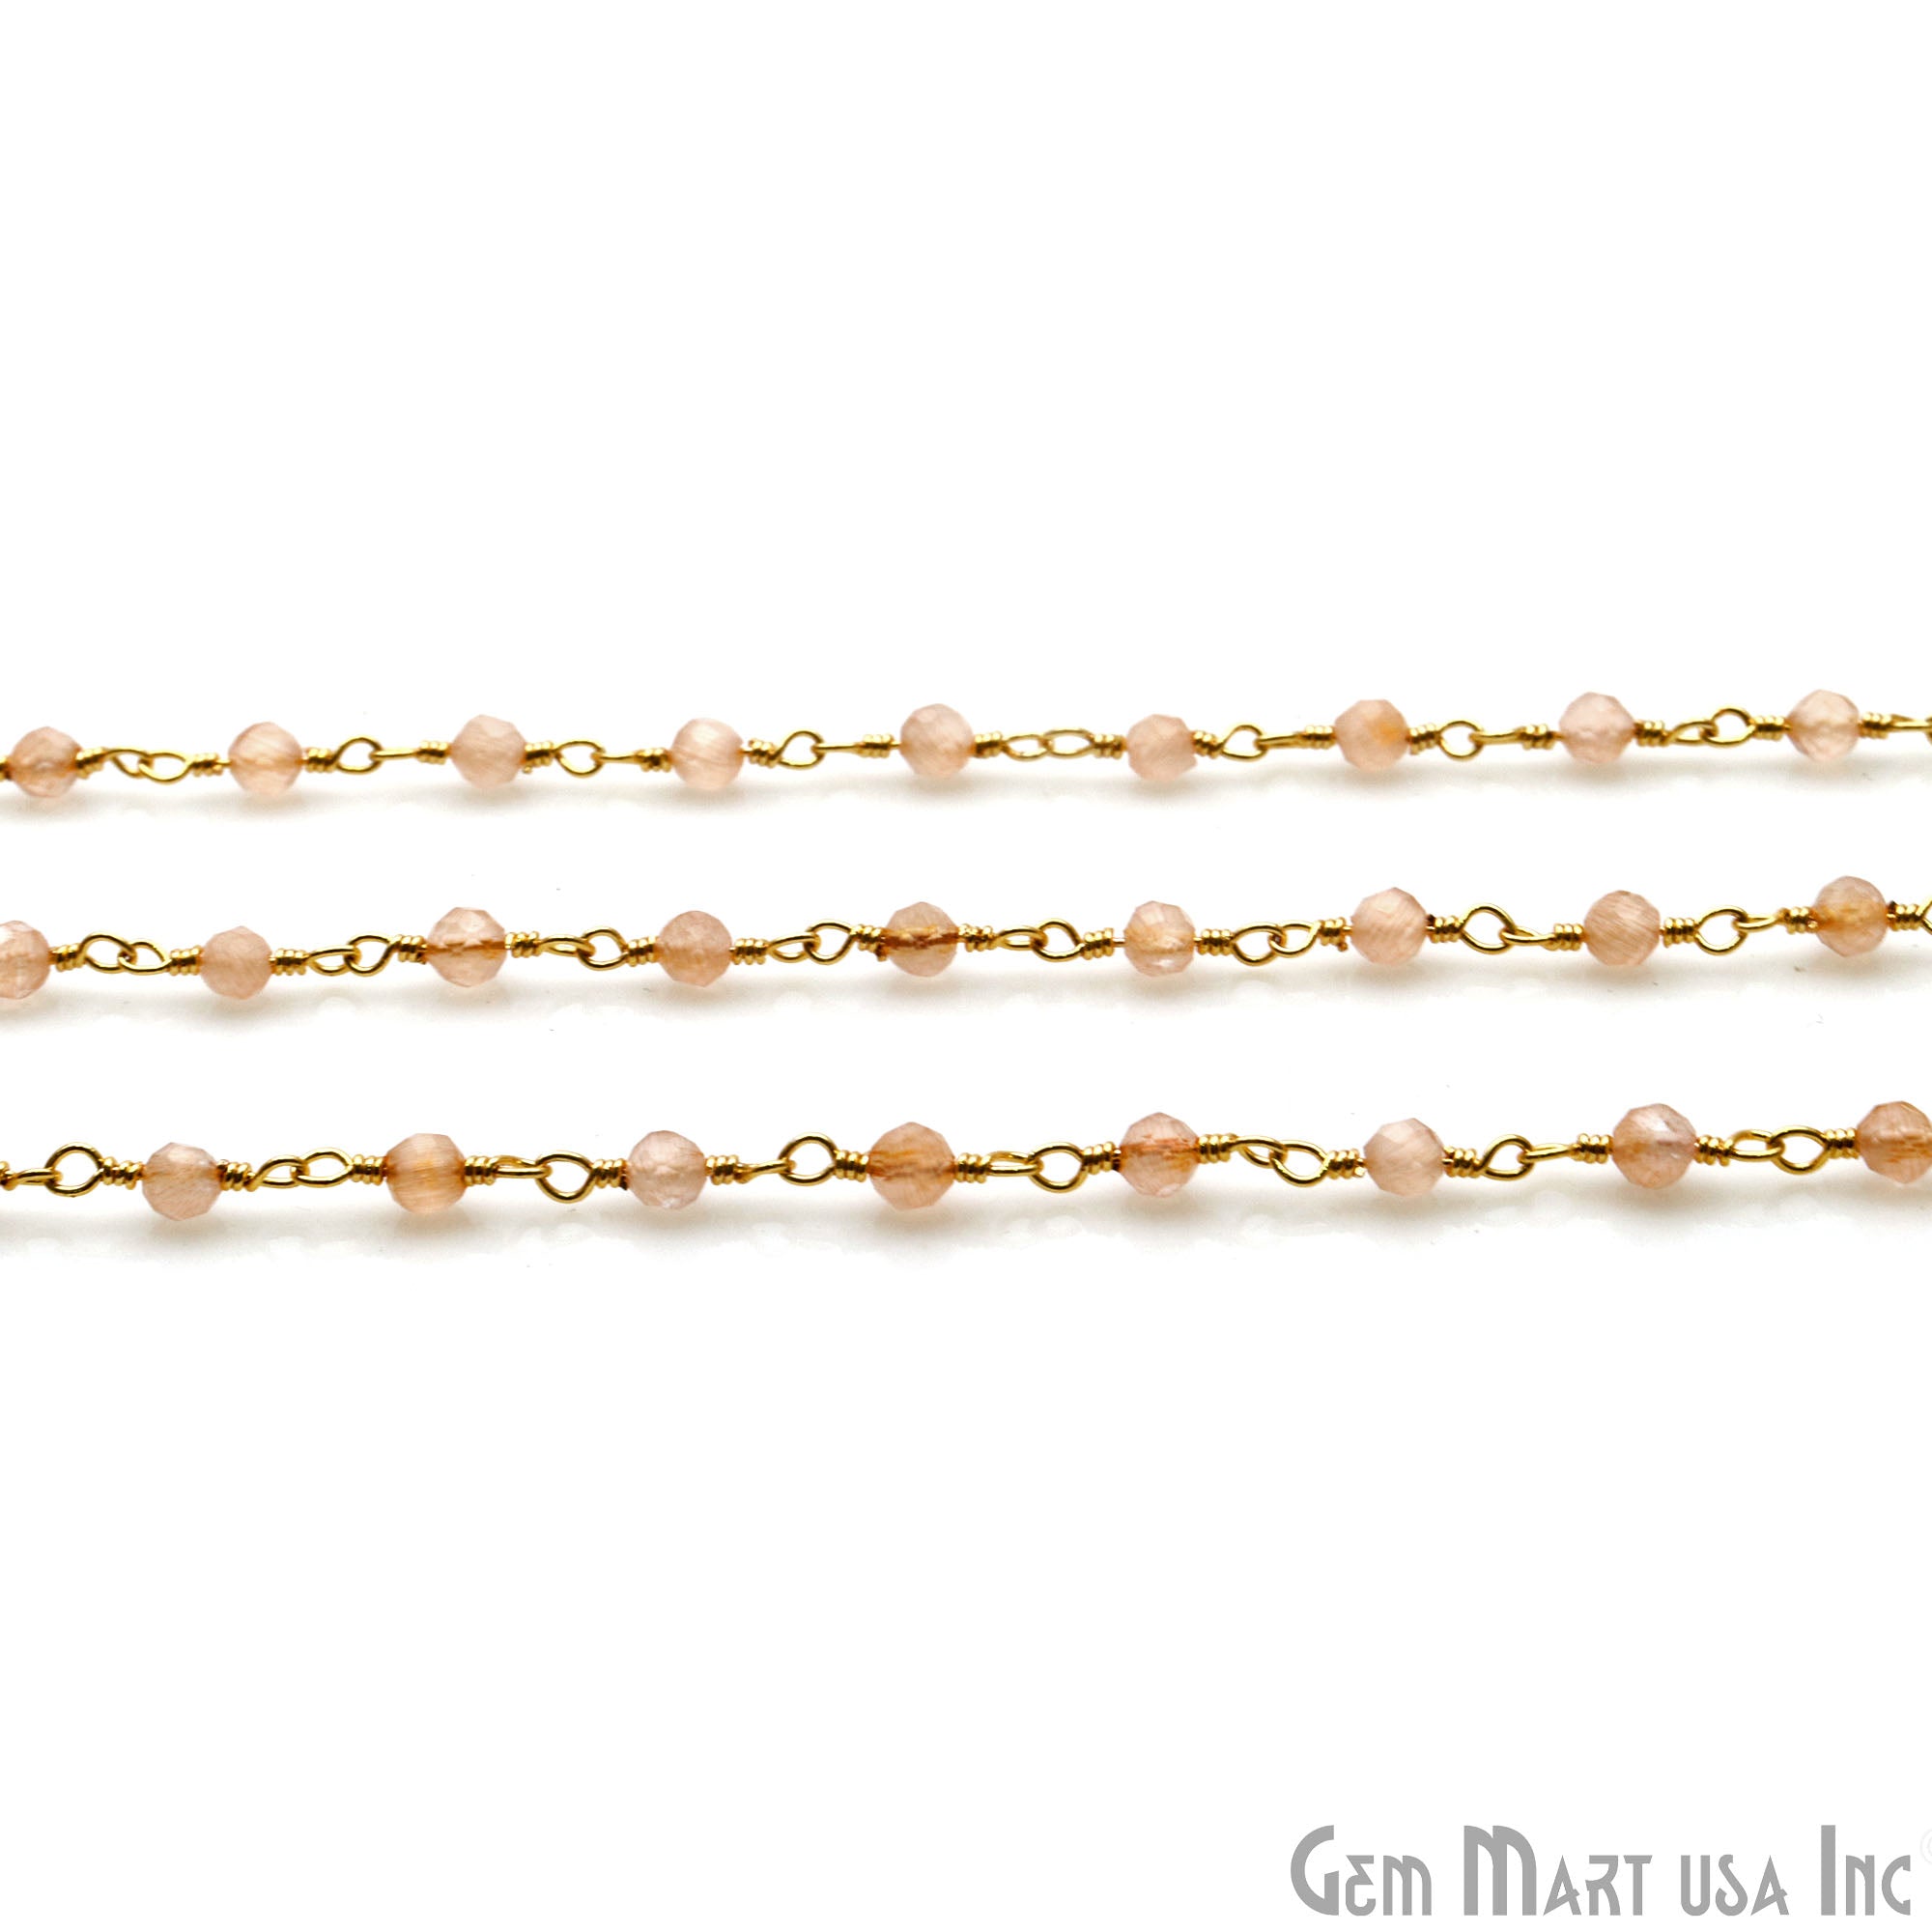 Susnstone Monalisa 3-3.5mm Gold Wire Wrapped Rosary Chain - GemMartUSA